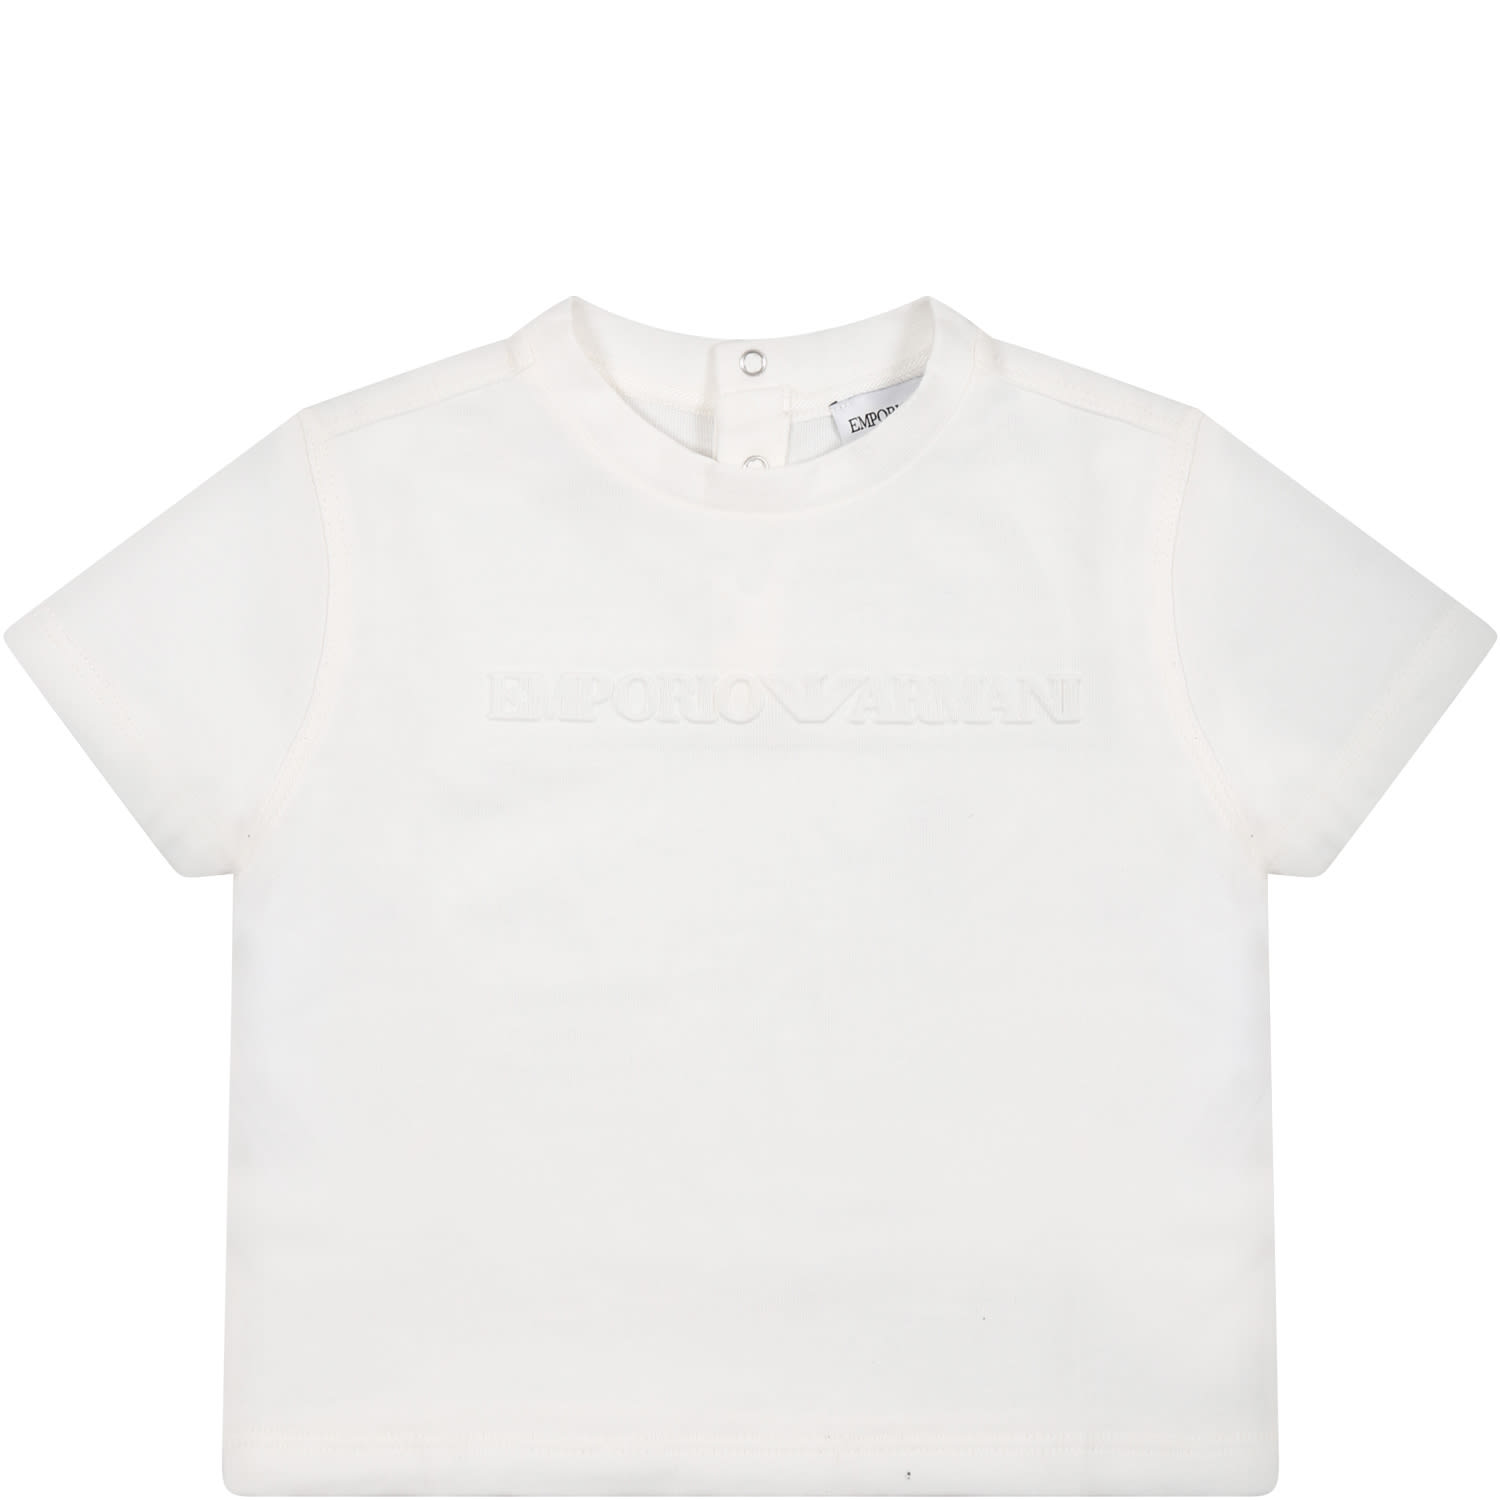 Armani Collezioni Babies' White T-shirt For Boaby Boy With Iconic Eaglet